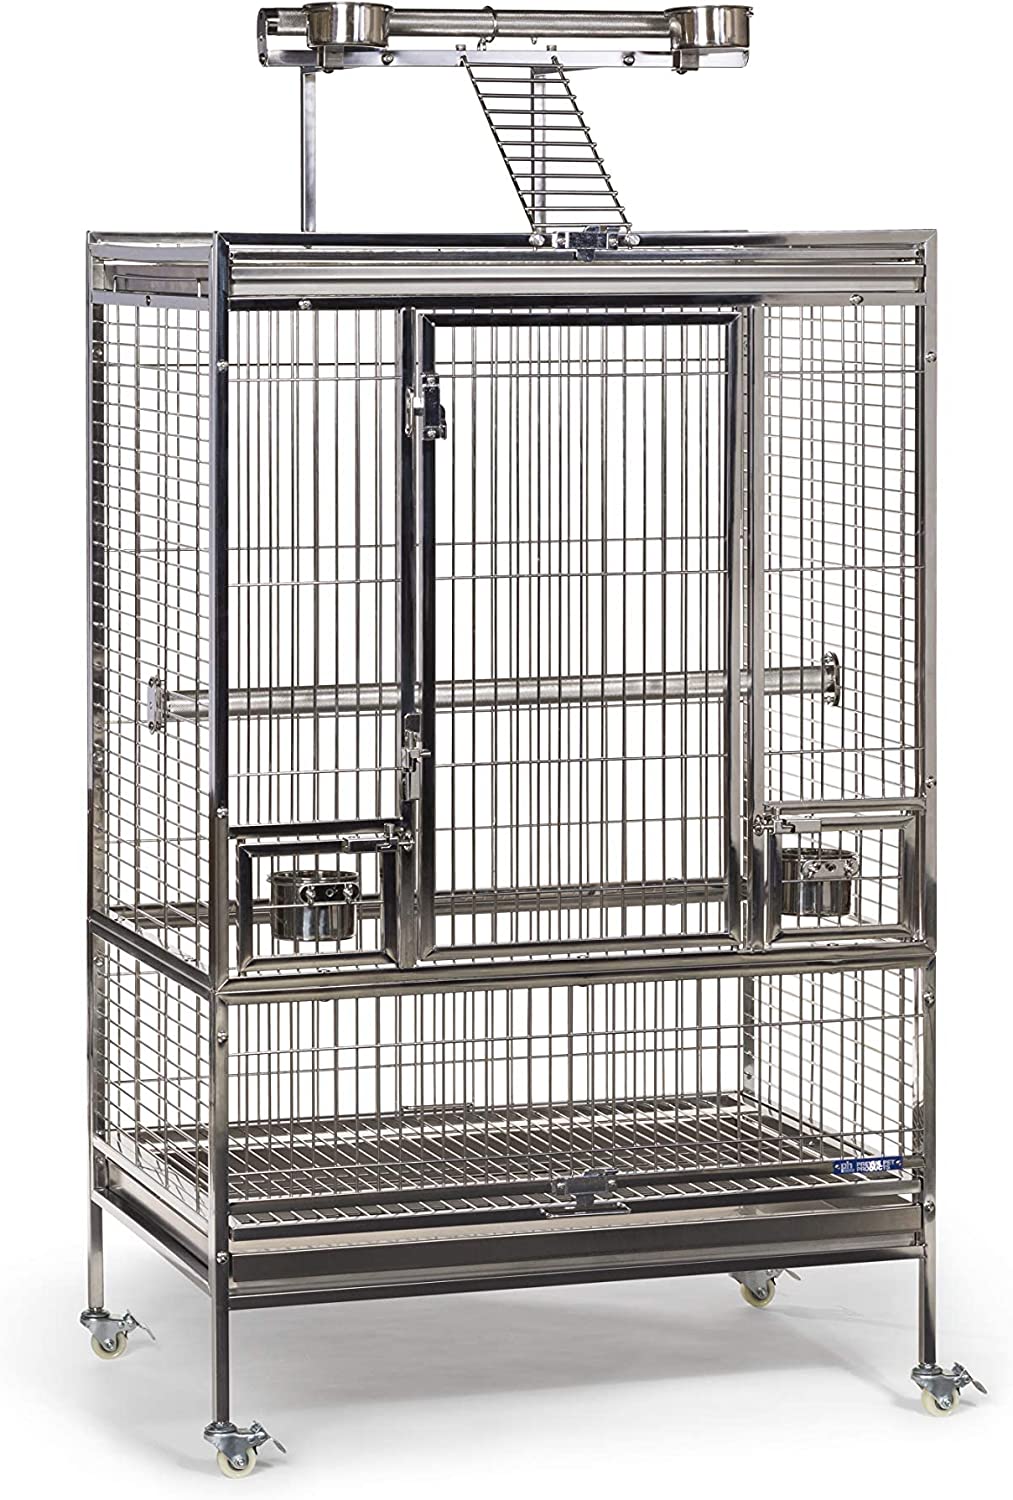 Prevue Pet Products Large Stainless Steel Play Top Bird Cage, Rust Resistant Metal Cage for Birds with Rooftop Ladder and Playtop